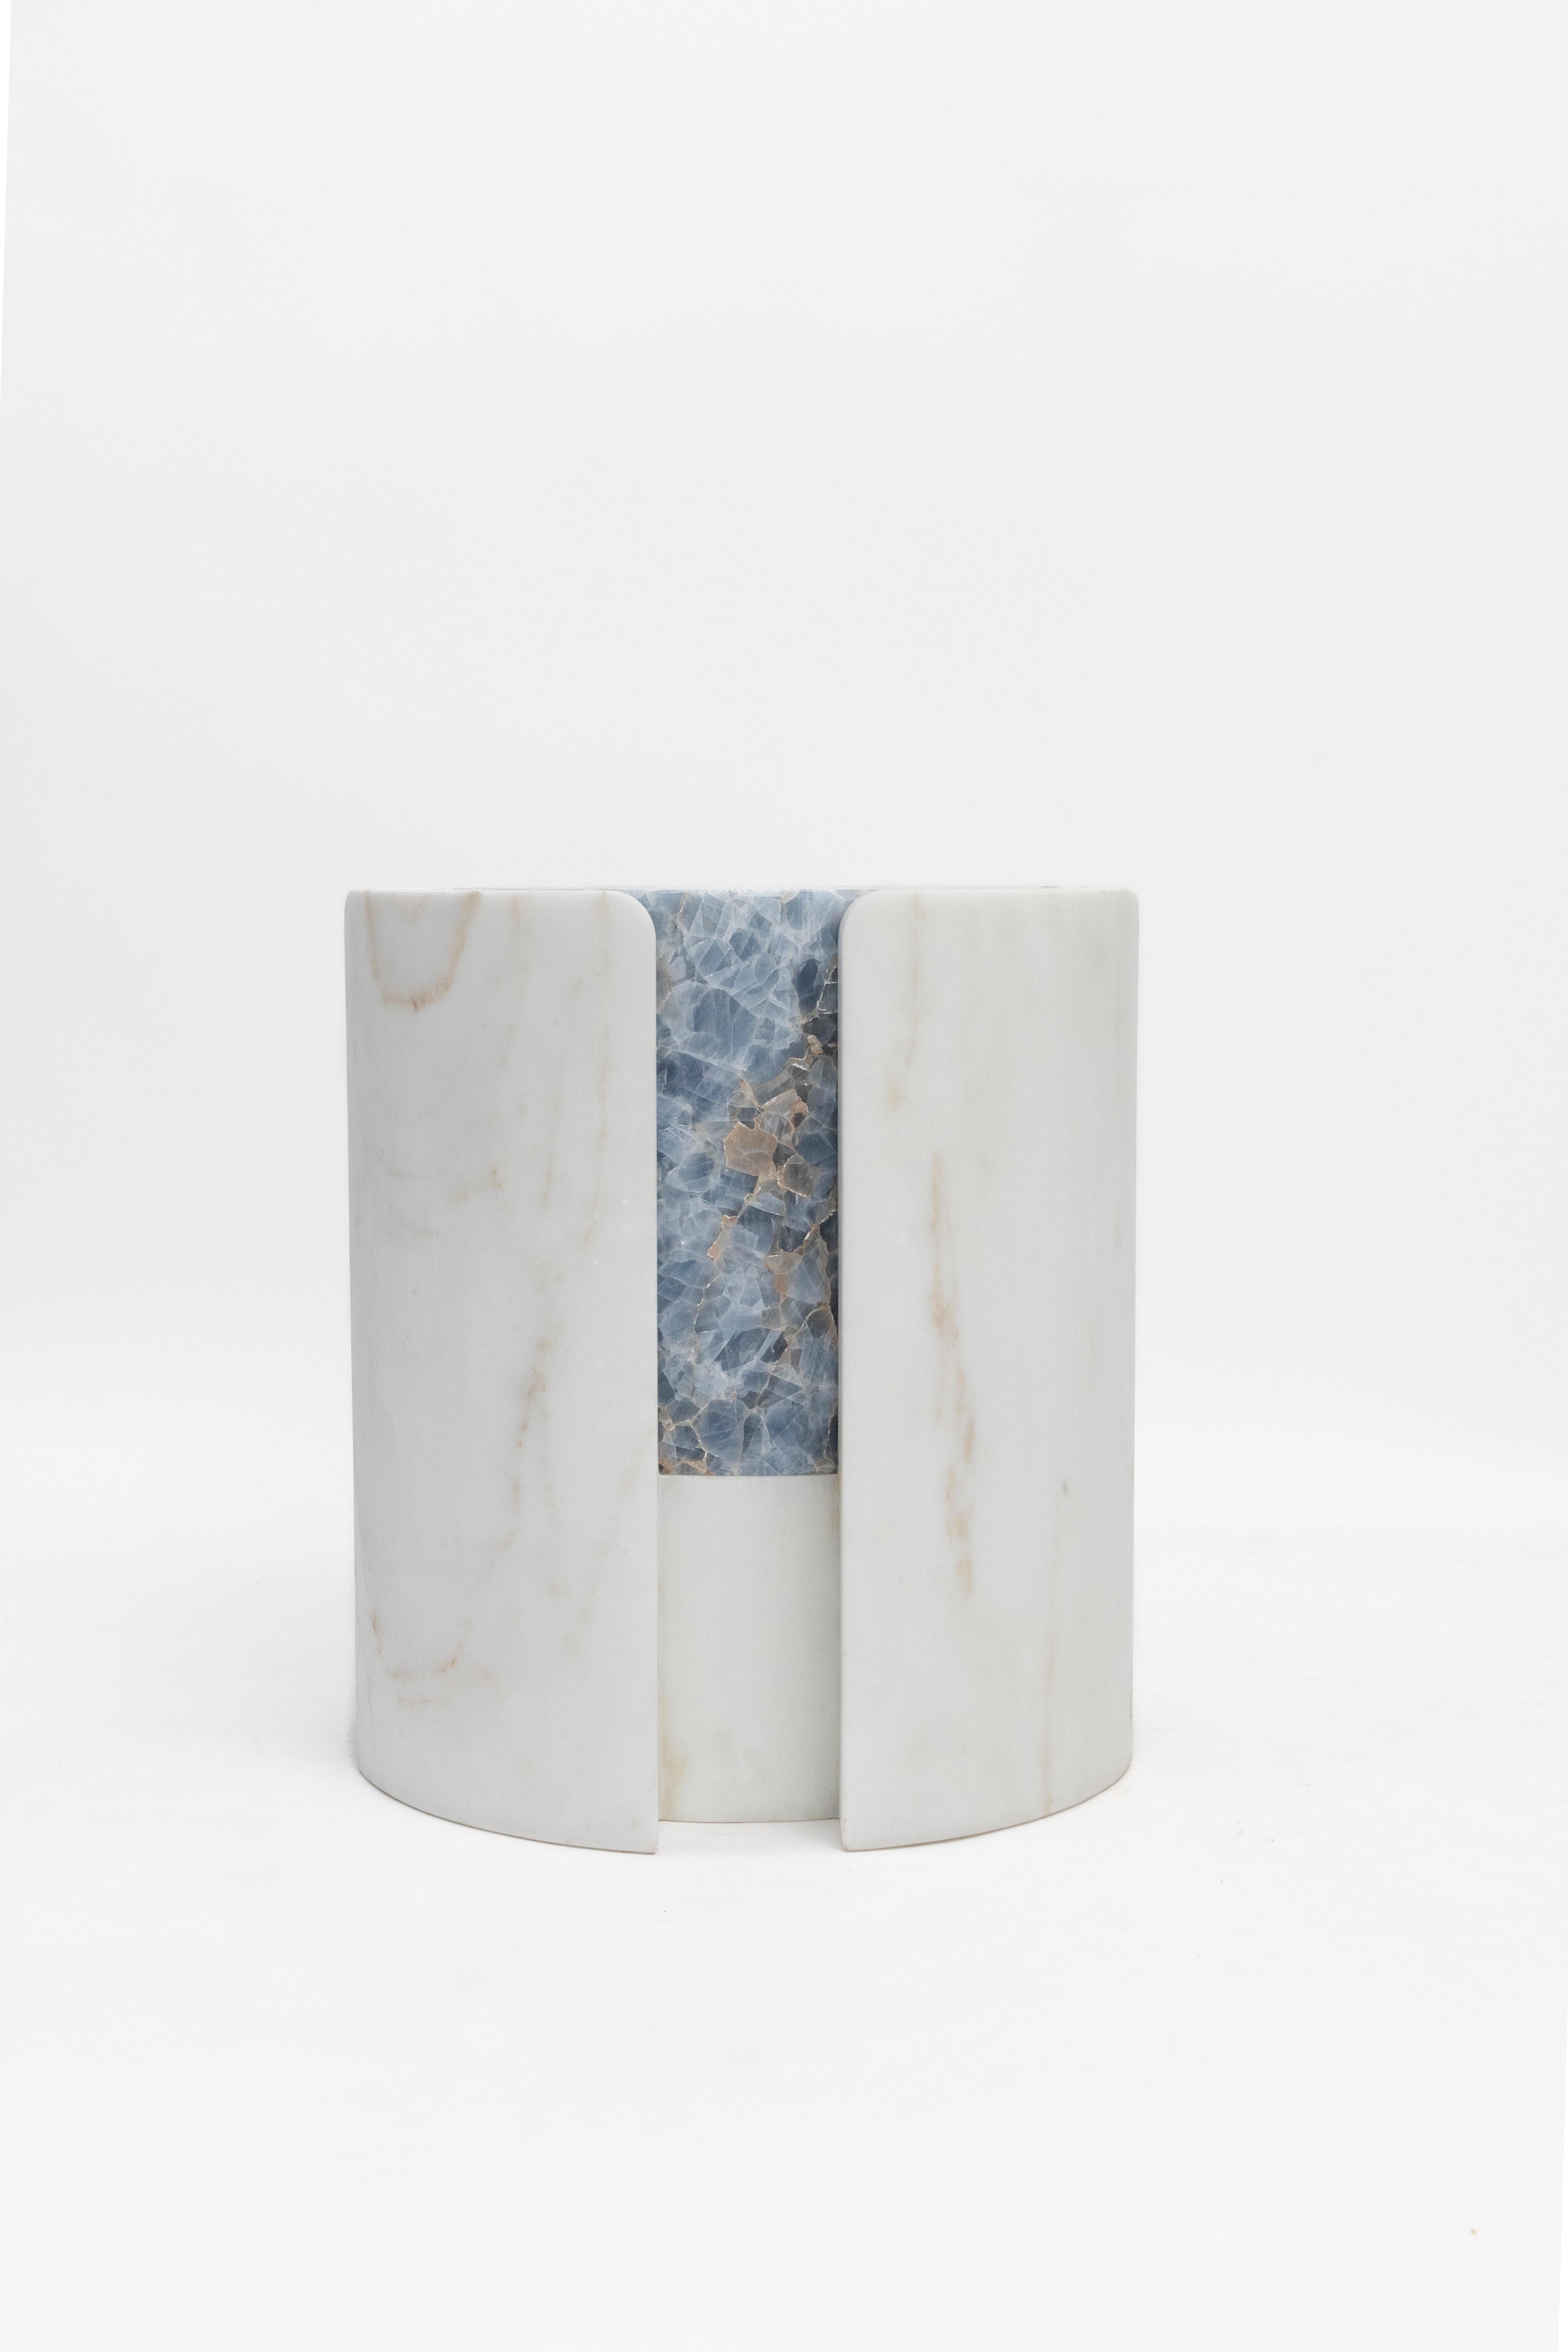 Materials:Golden Calacatta marble and blue calcite
Indoors and outdoors
Side table / Stool

While, in principle, marble bears not a volcanic origin, the veiny, fine-grained Yule marble employed for this variation of Sten Studio’s distinctive stools